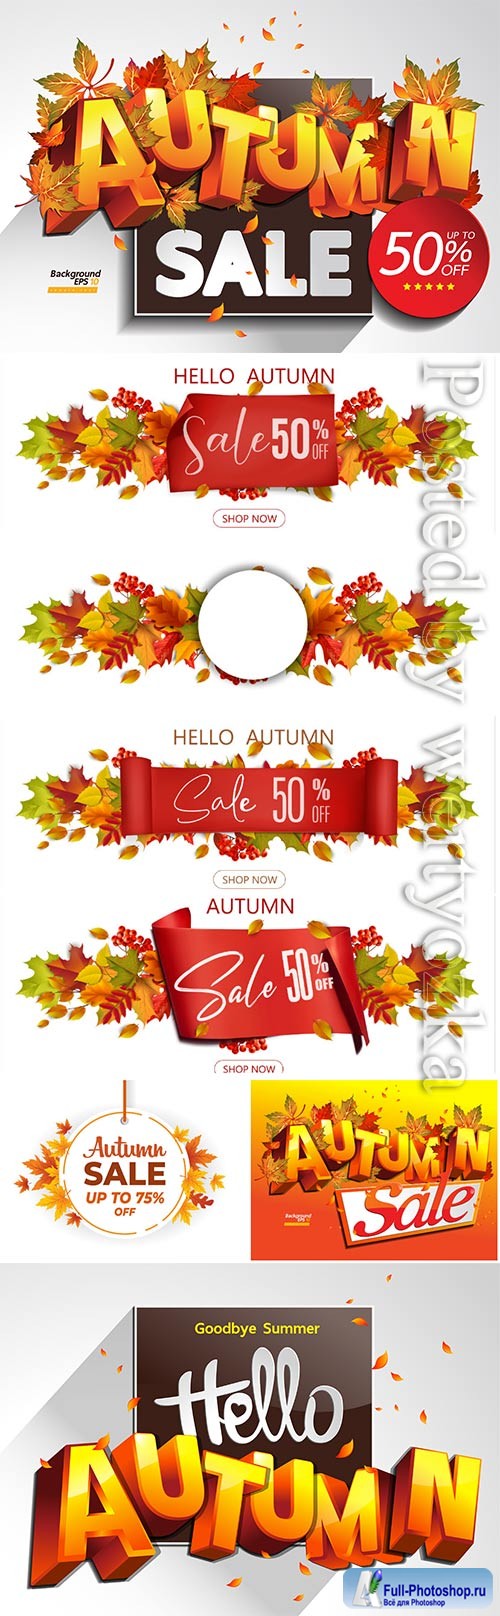 Autumn banner vector template with colorful autumn leaves